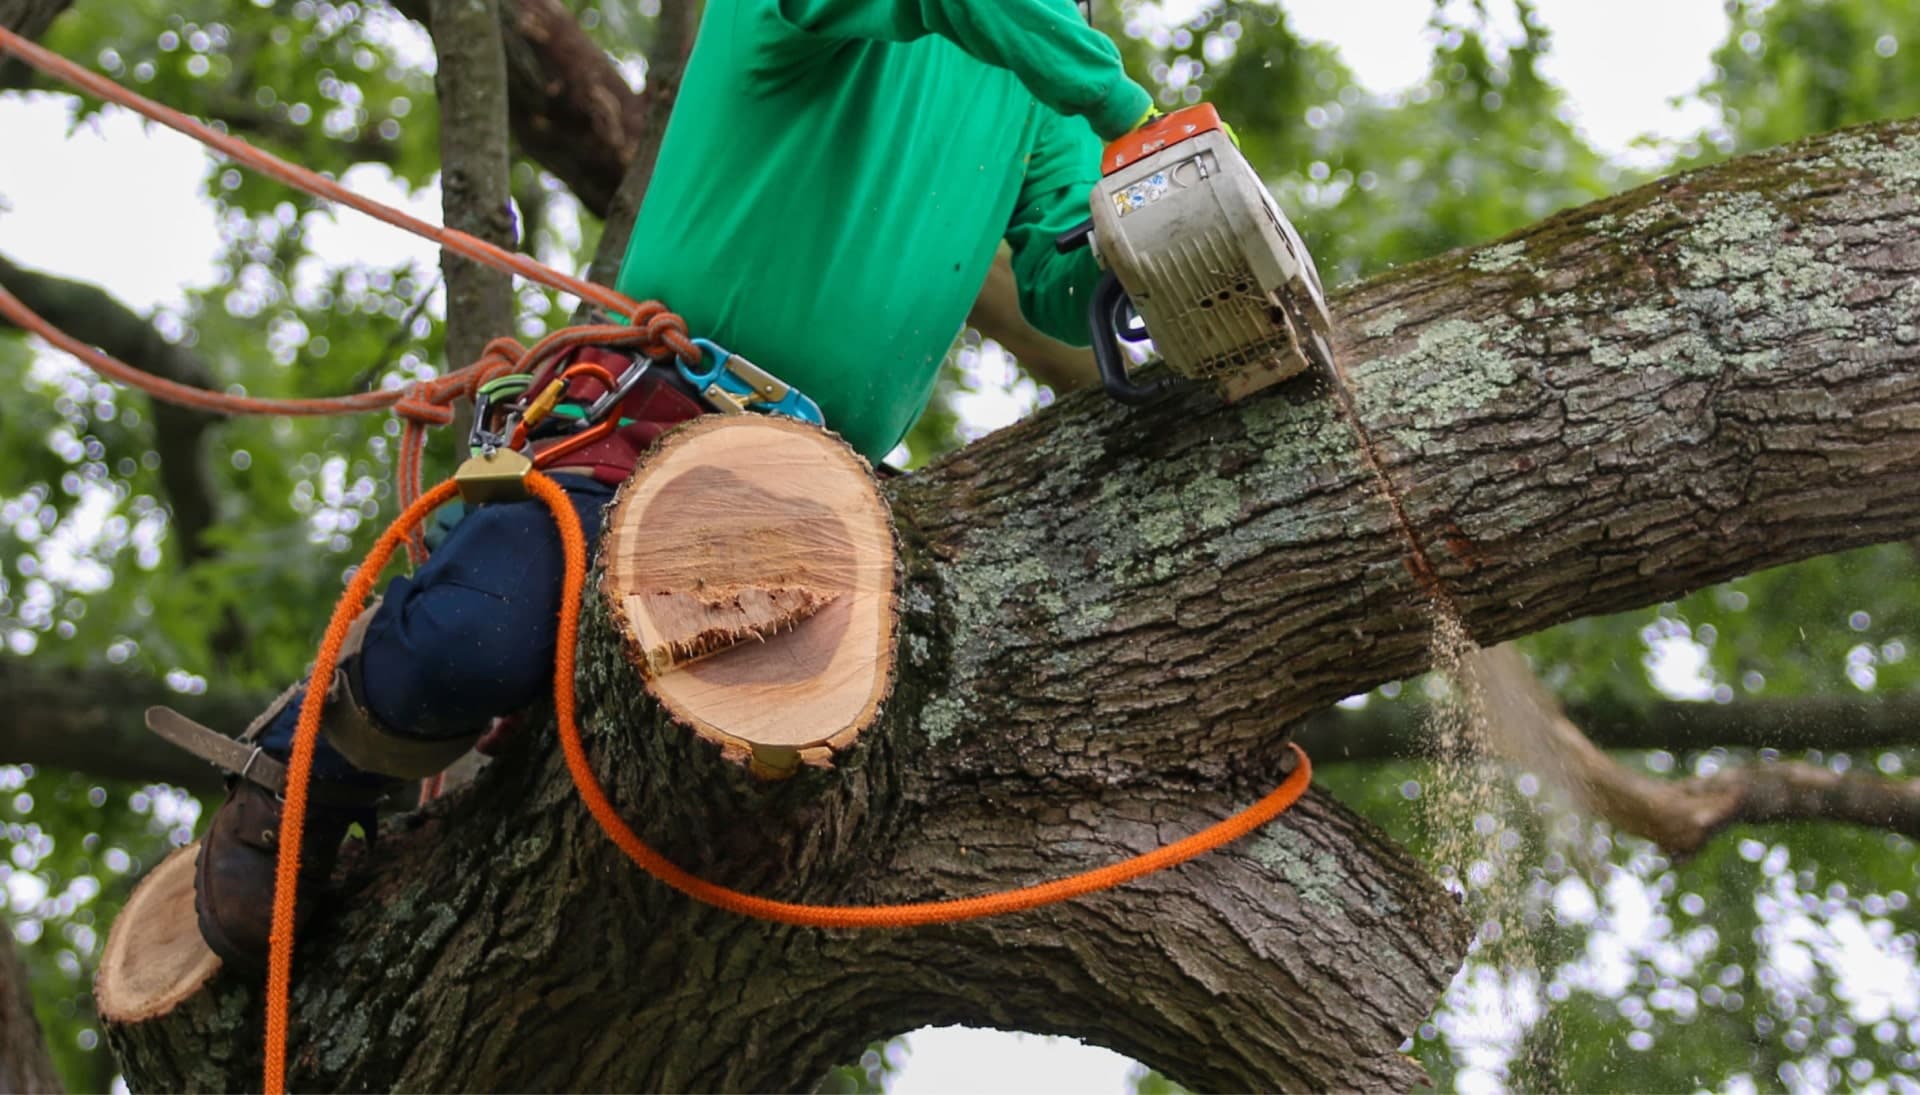 Shed your worries away with best tree removal in Memphis